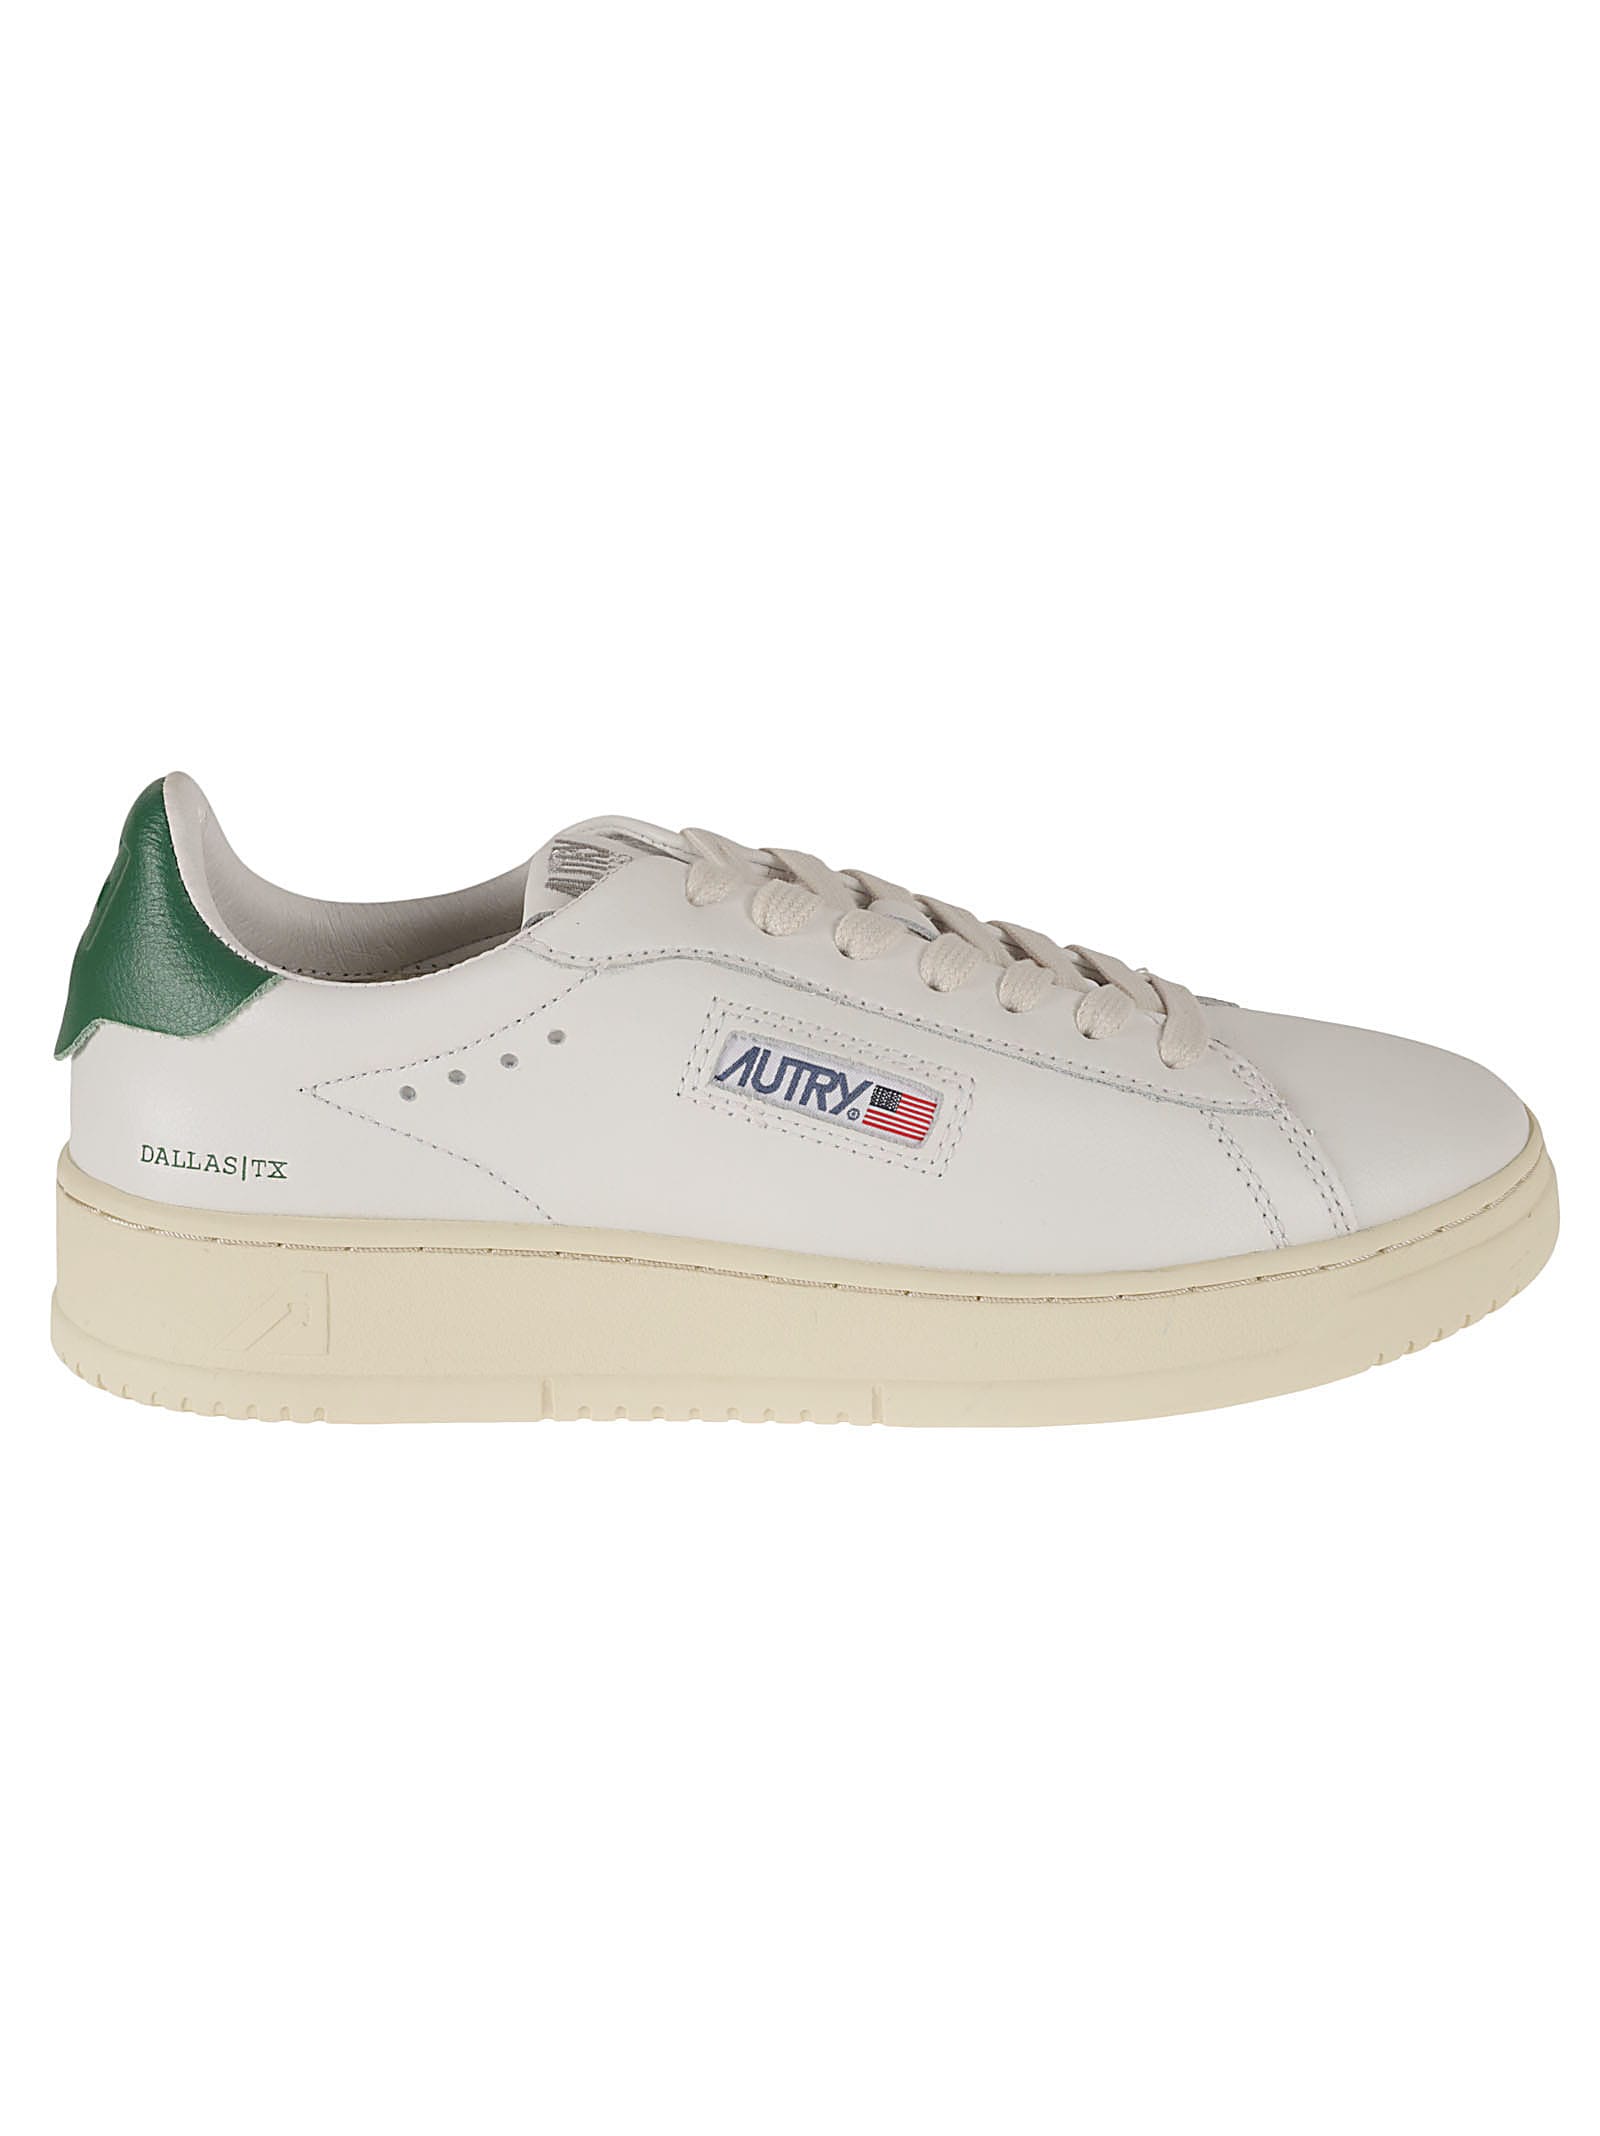 Shop Autry Dallas Low Man Sneakers In White